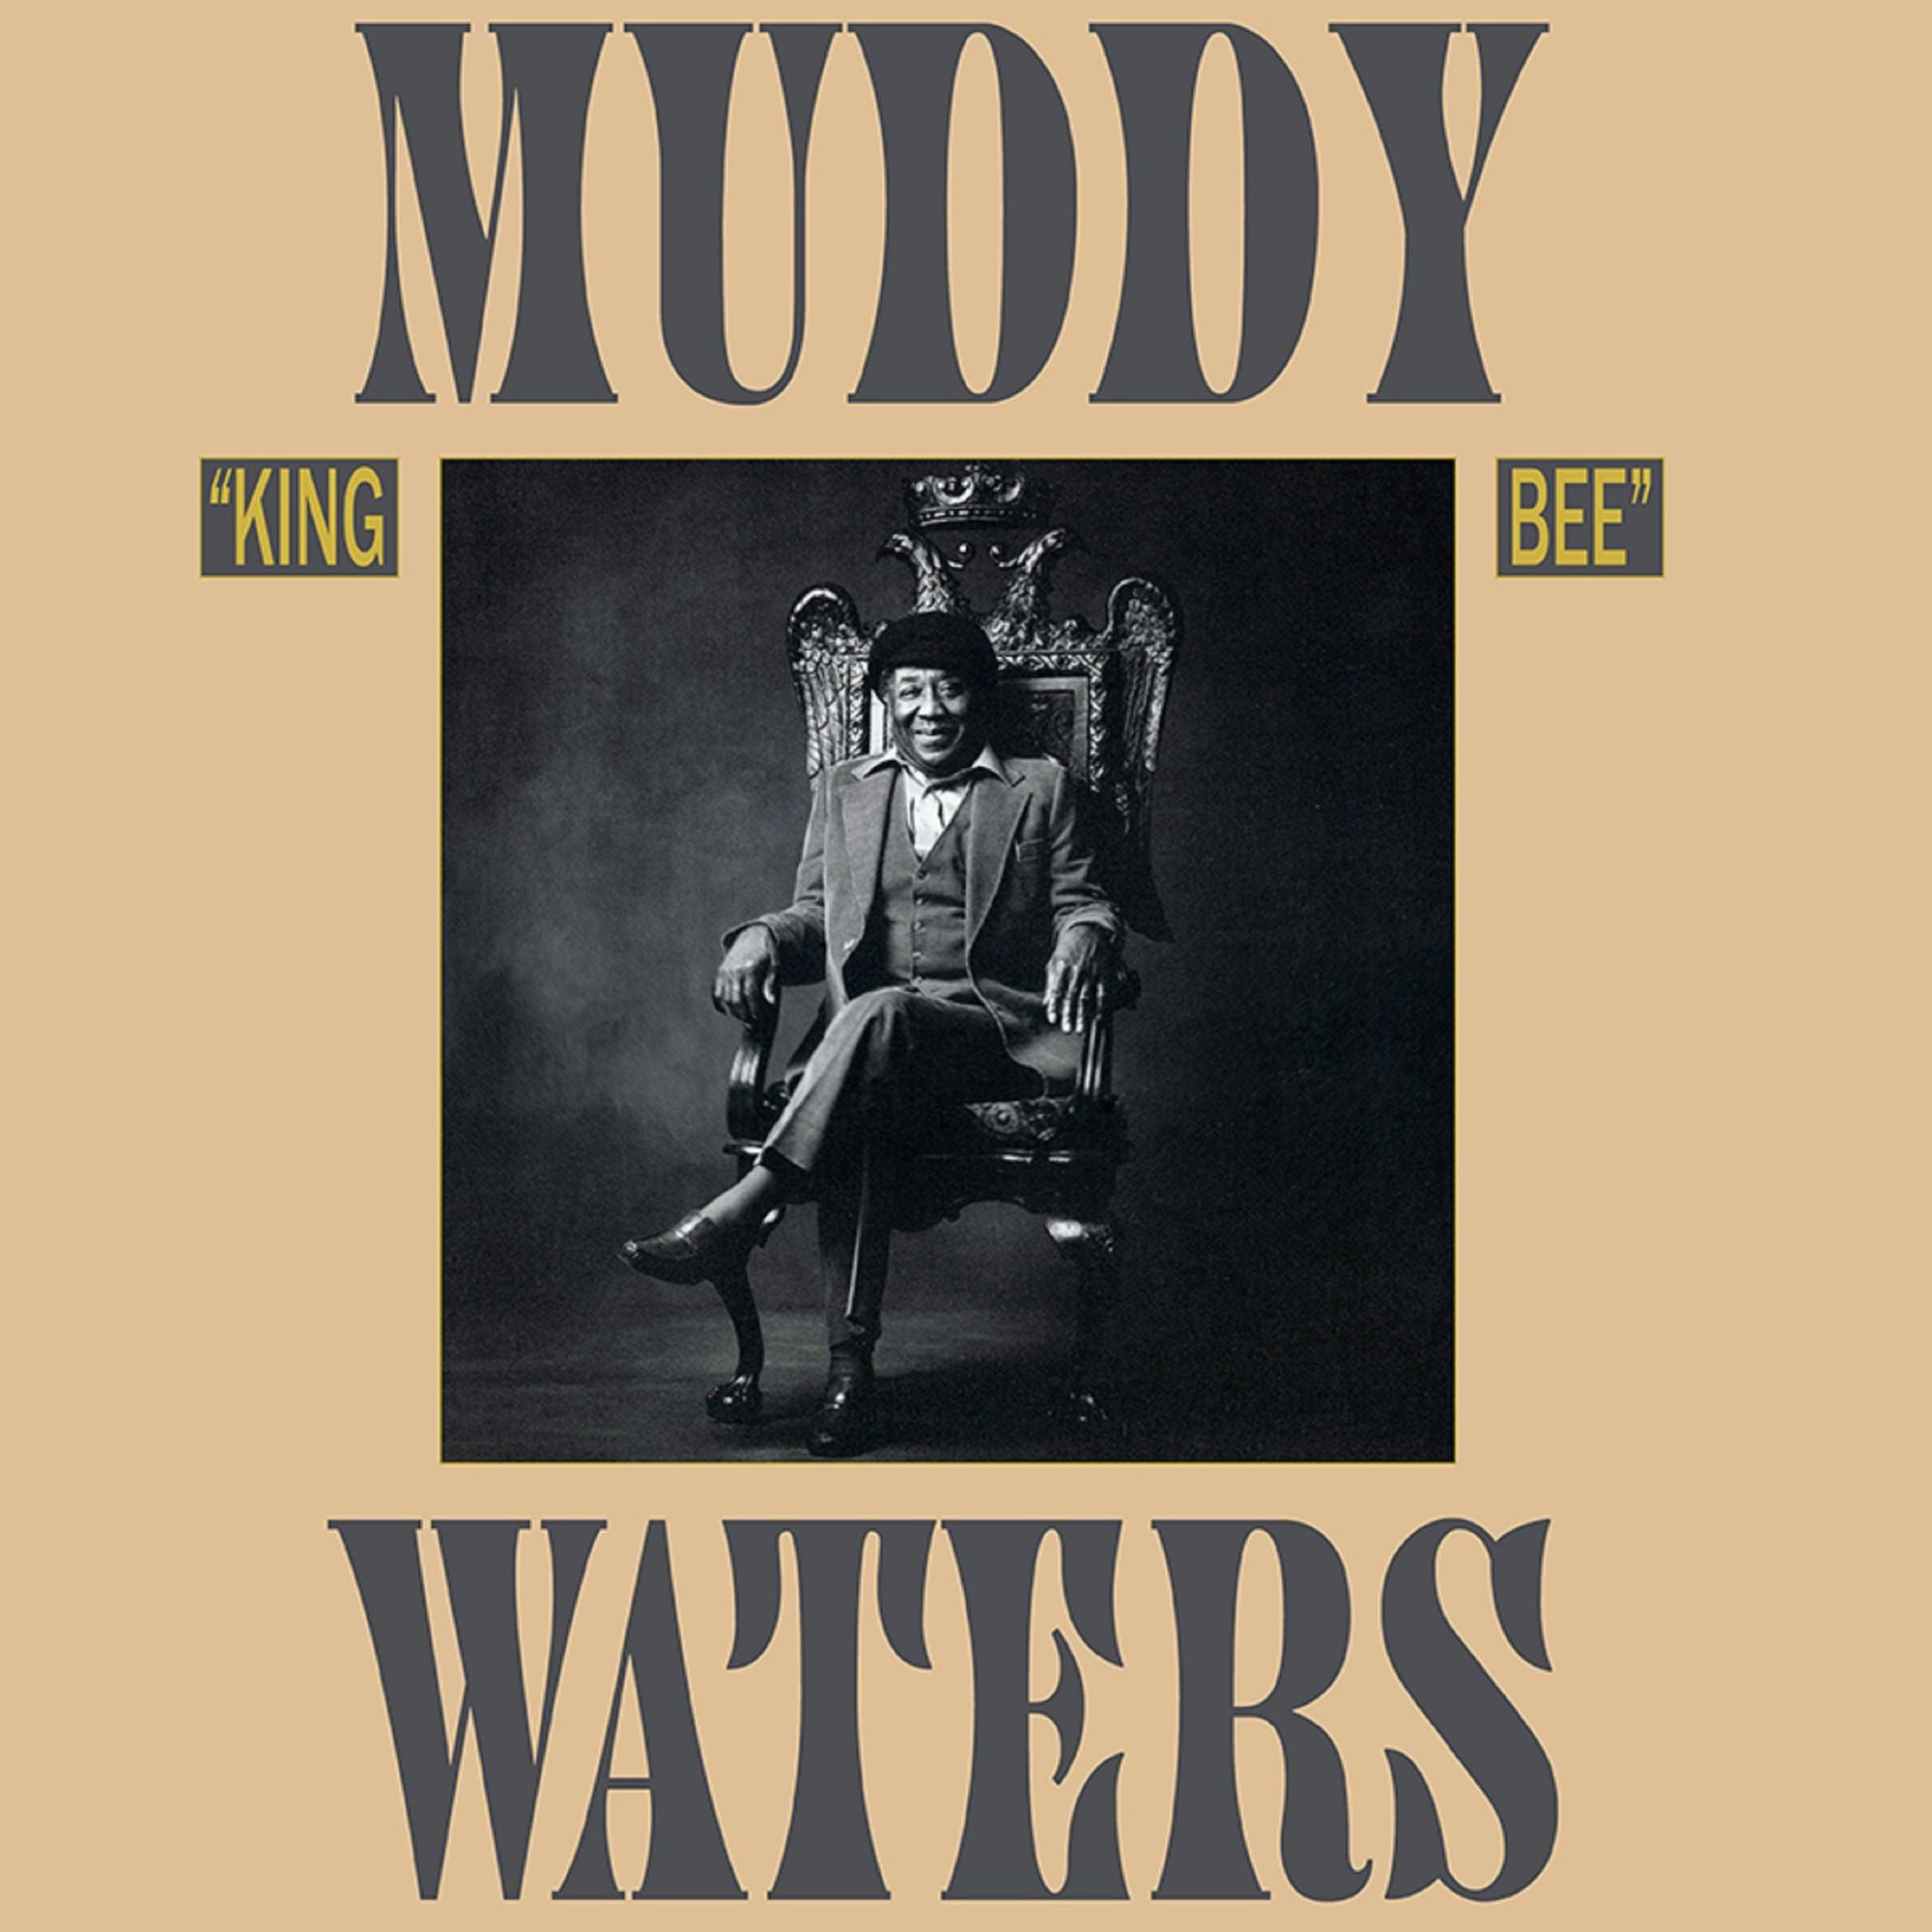 Muddy Waters - King Bee (1981) - New Vinyl LP 2019 Translucent Gold 180gram Reissue - Chicago Blues